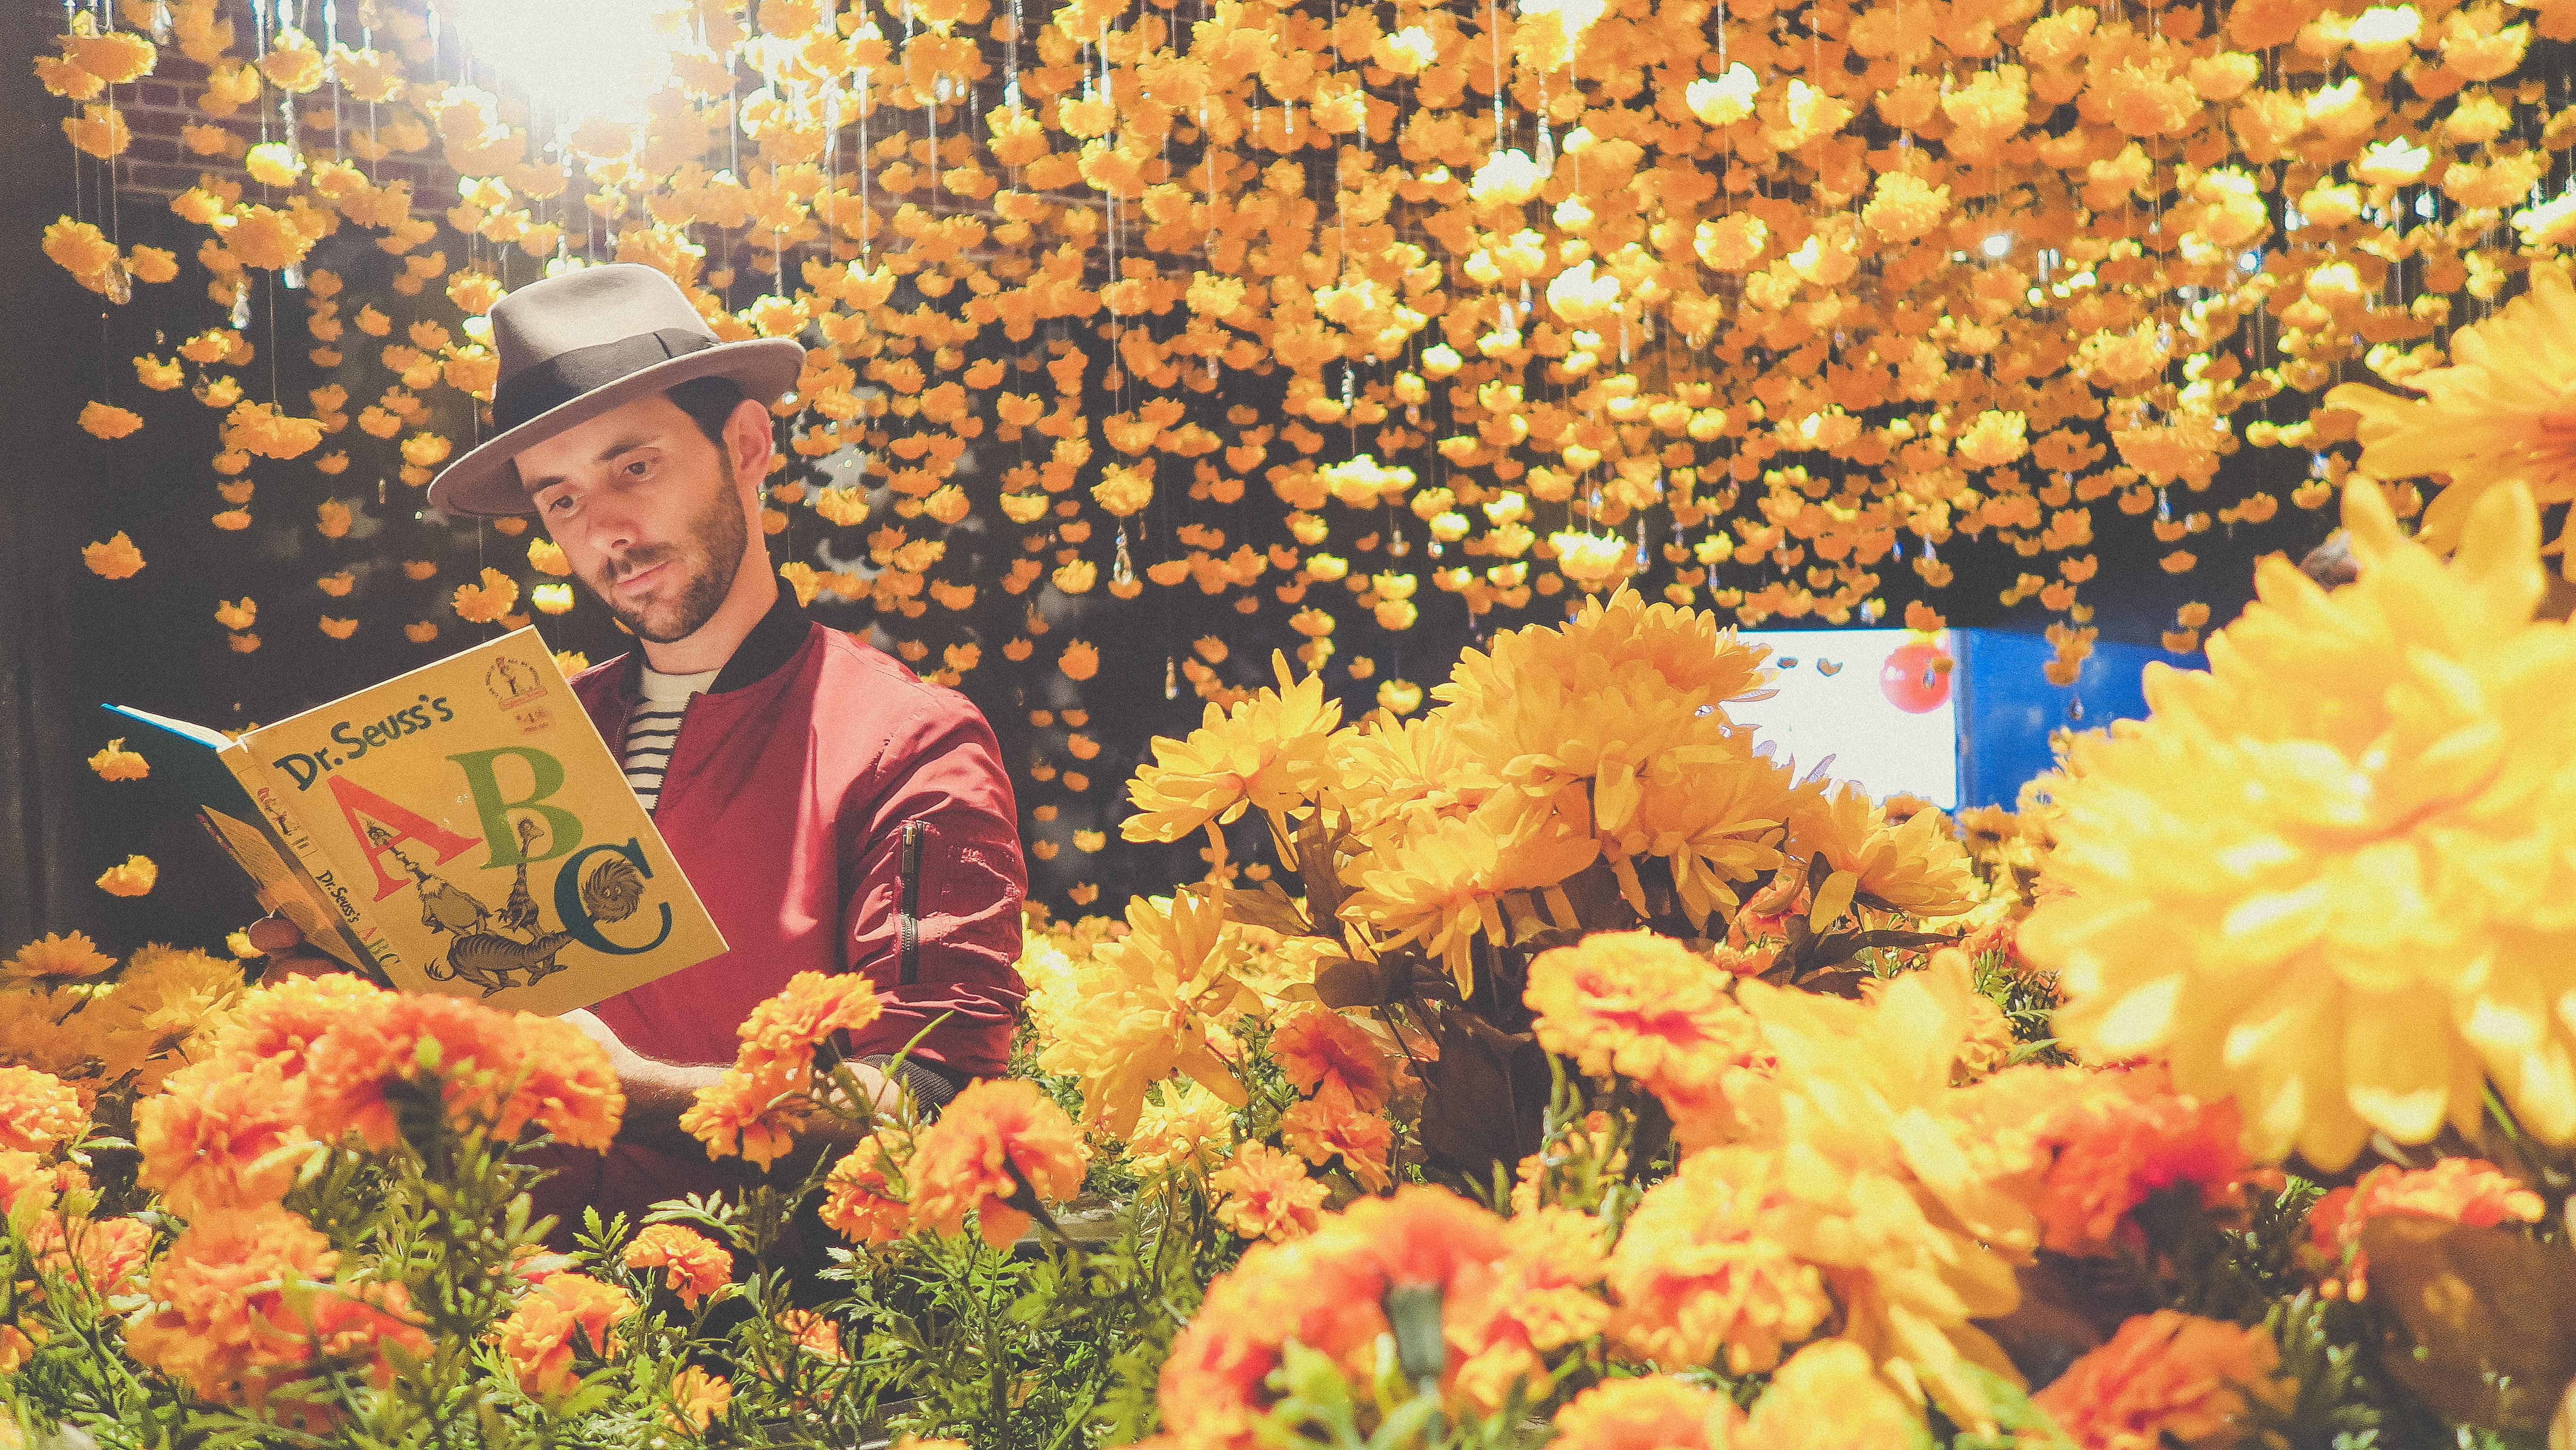 man reading Underrated Dr Seuss Books near yellow flowers